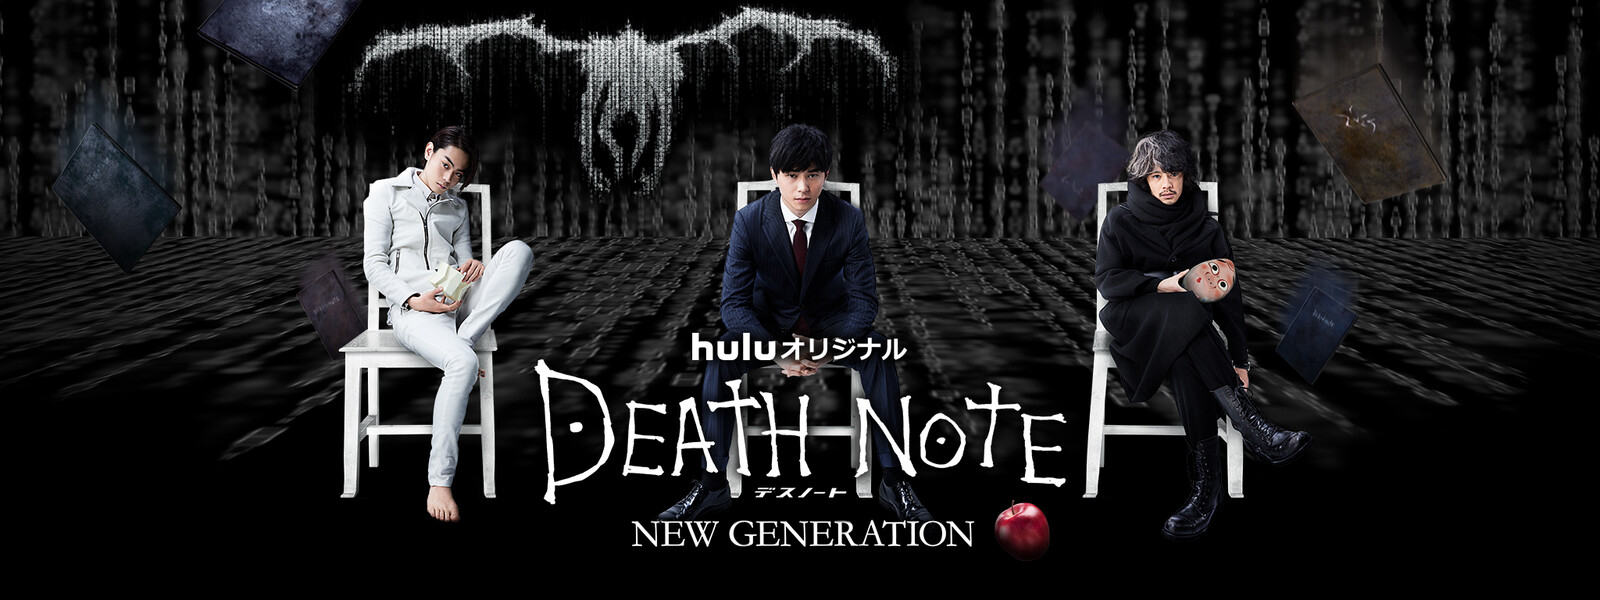 DEATH NOTE デスノート NEW GENERATIONの動画 - メイキング DEATH NOTE デスノート the Last name 〜profile report from L〜